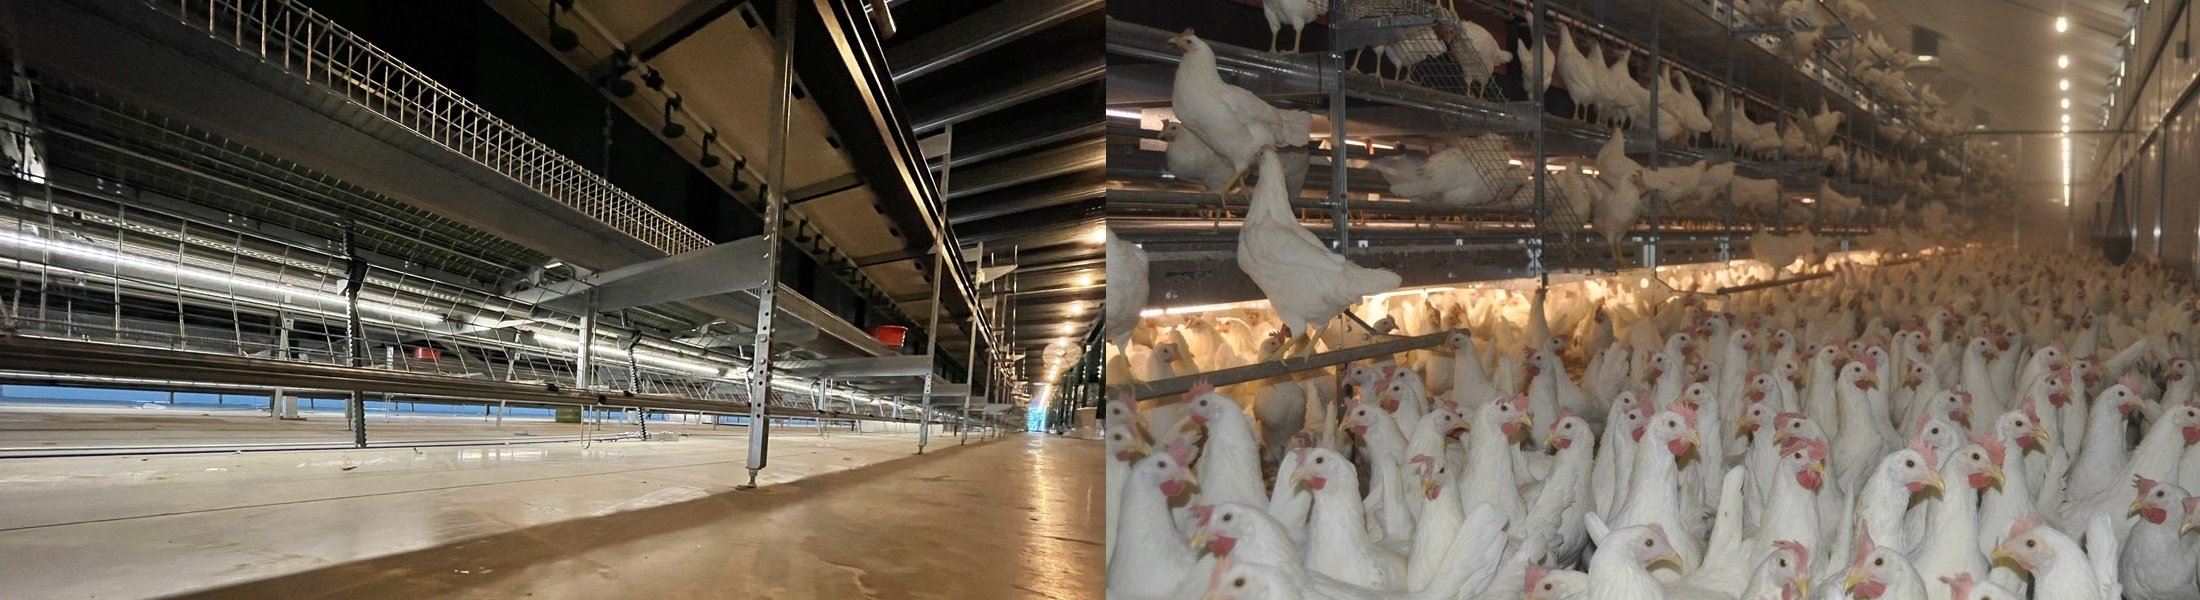 LED Bulbs and LED Tubes in Poultry house